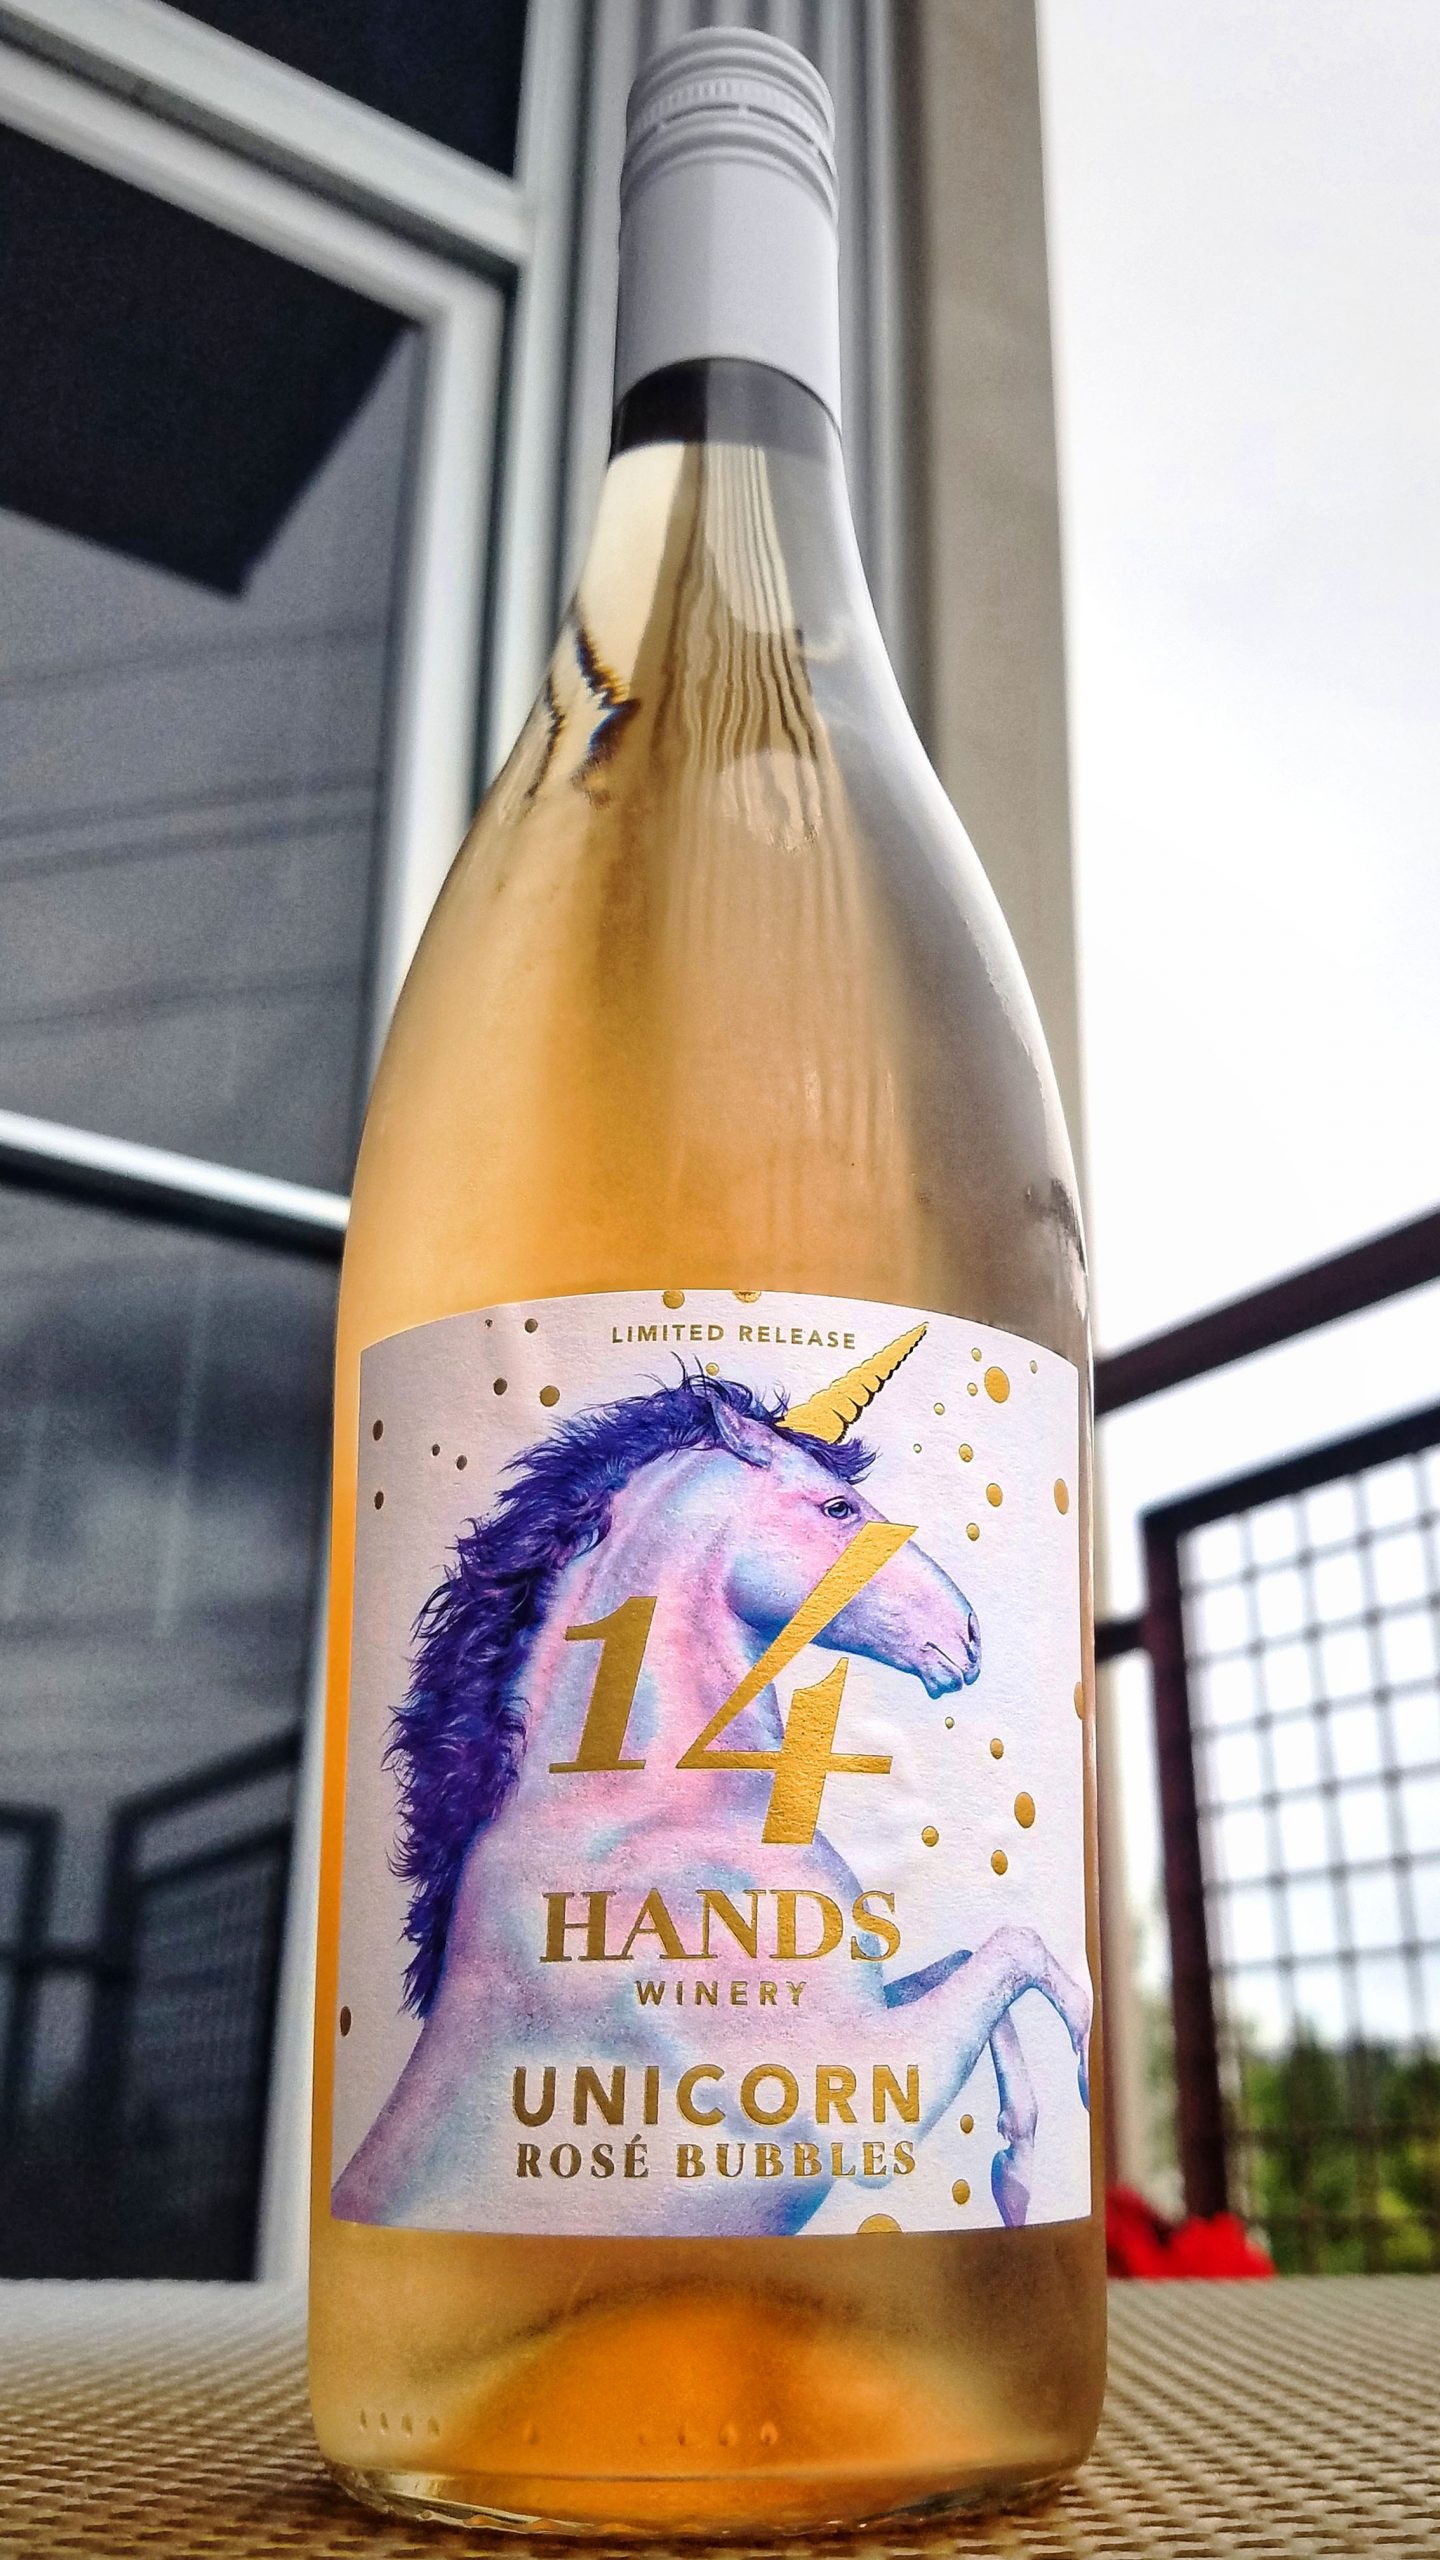 14 Hands Unicorn Rose Bubbles Limited Edition